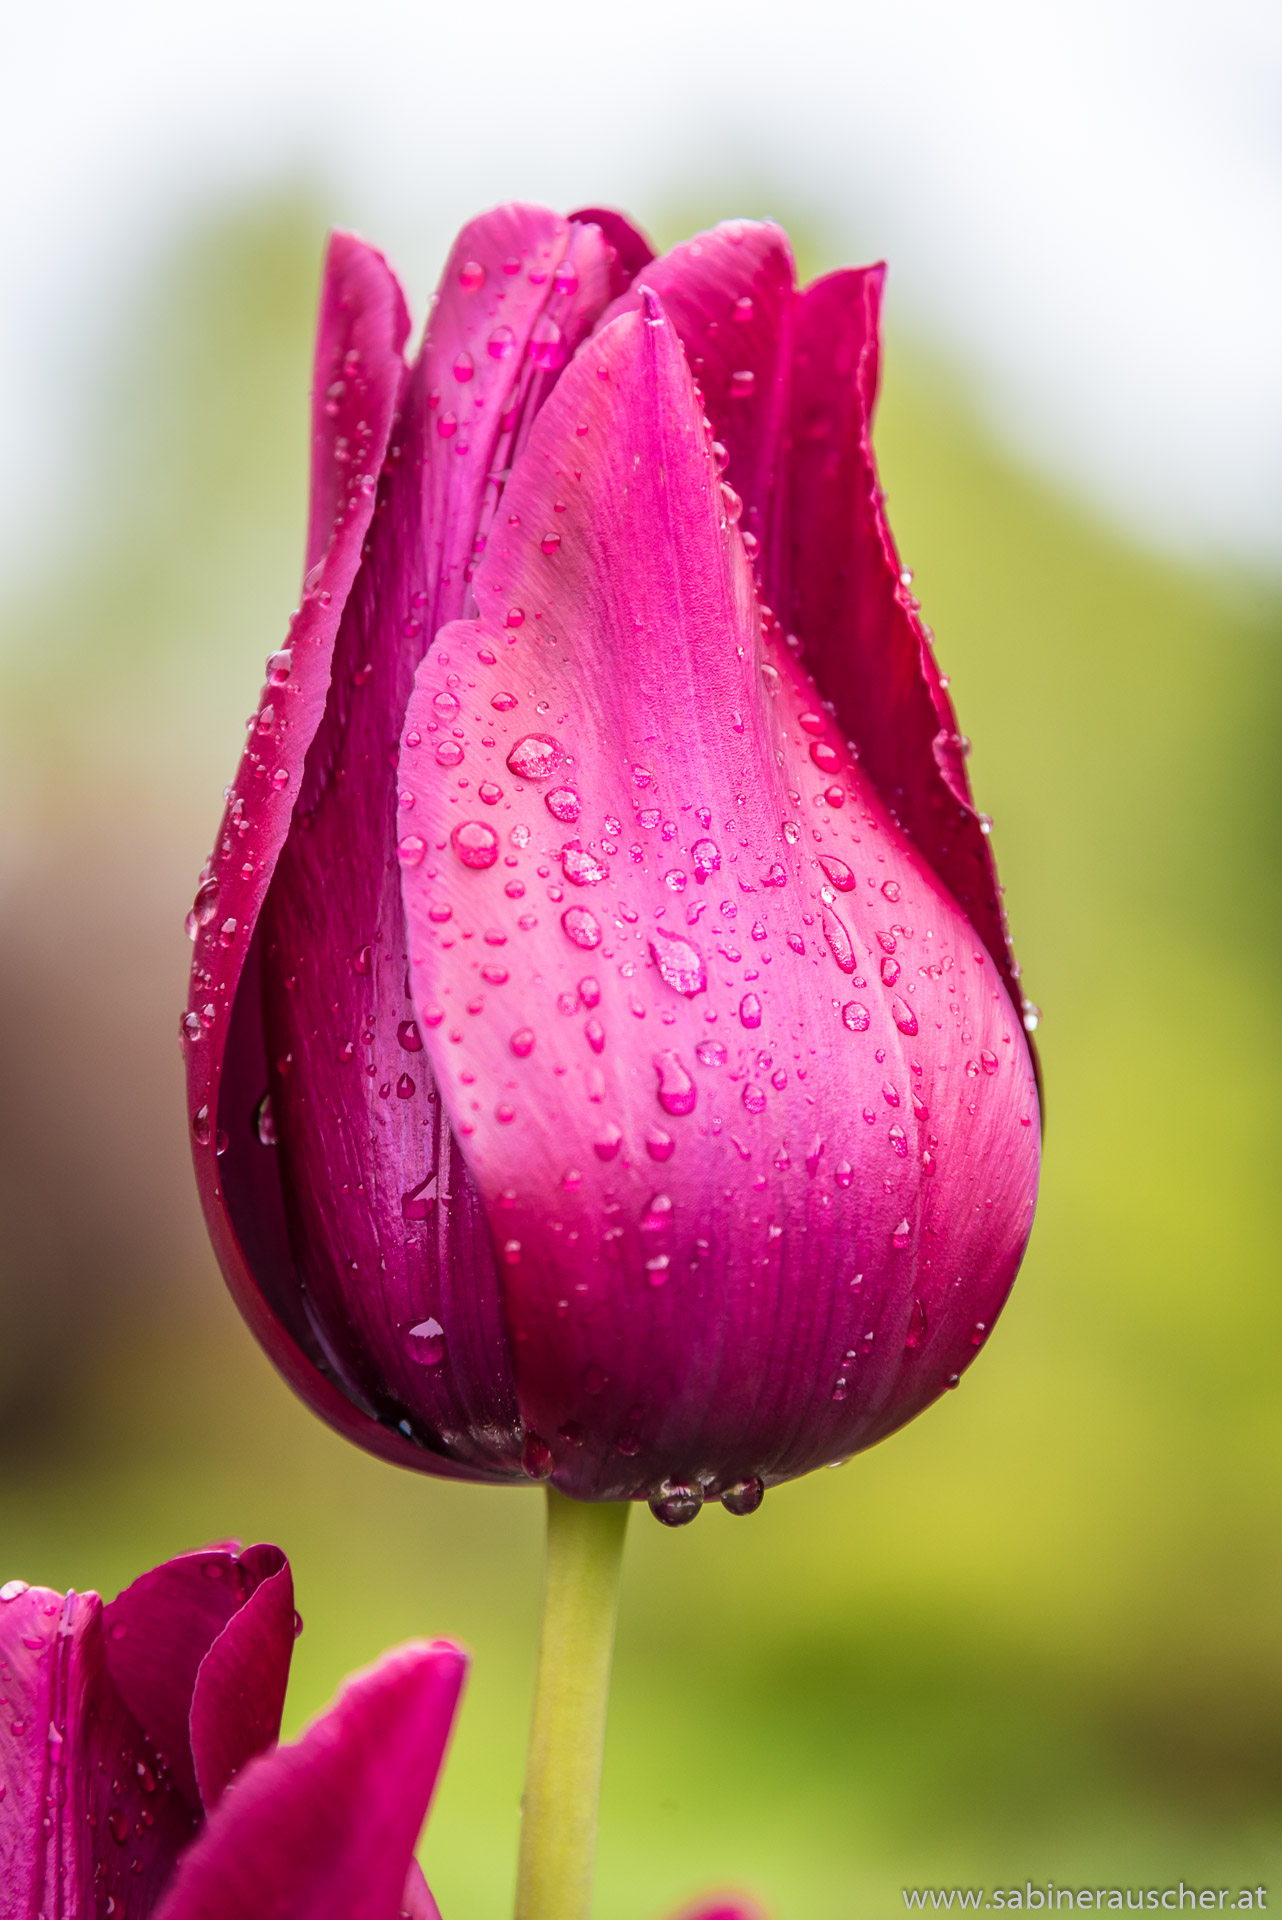 Tulip after the rain in Newby Hall in Yorkshire | im Garten von Newby Hall in Yorkshire